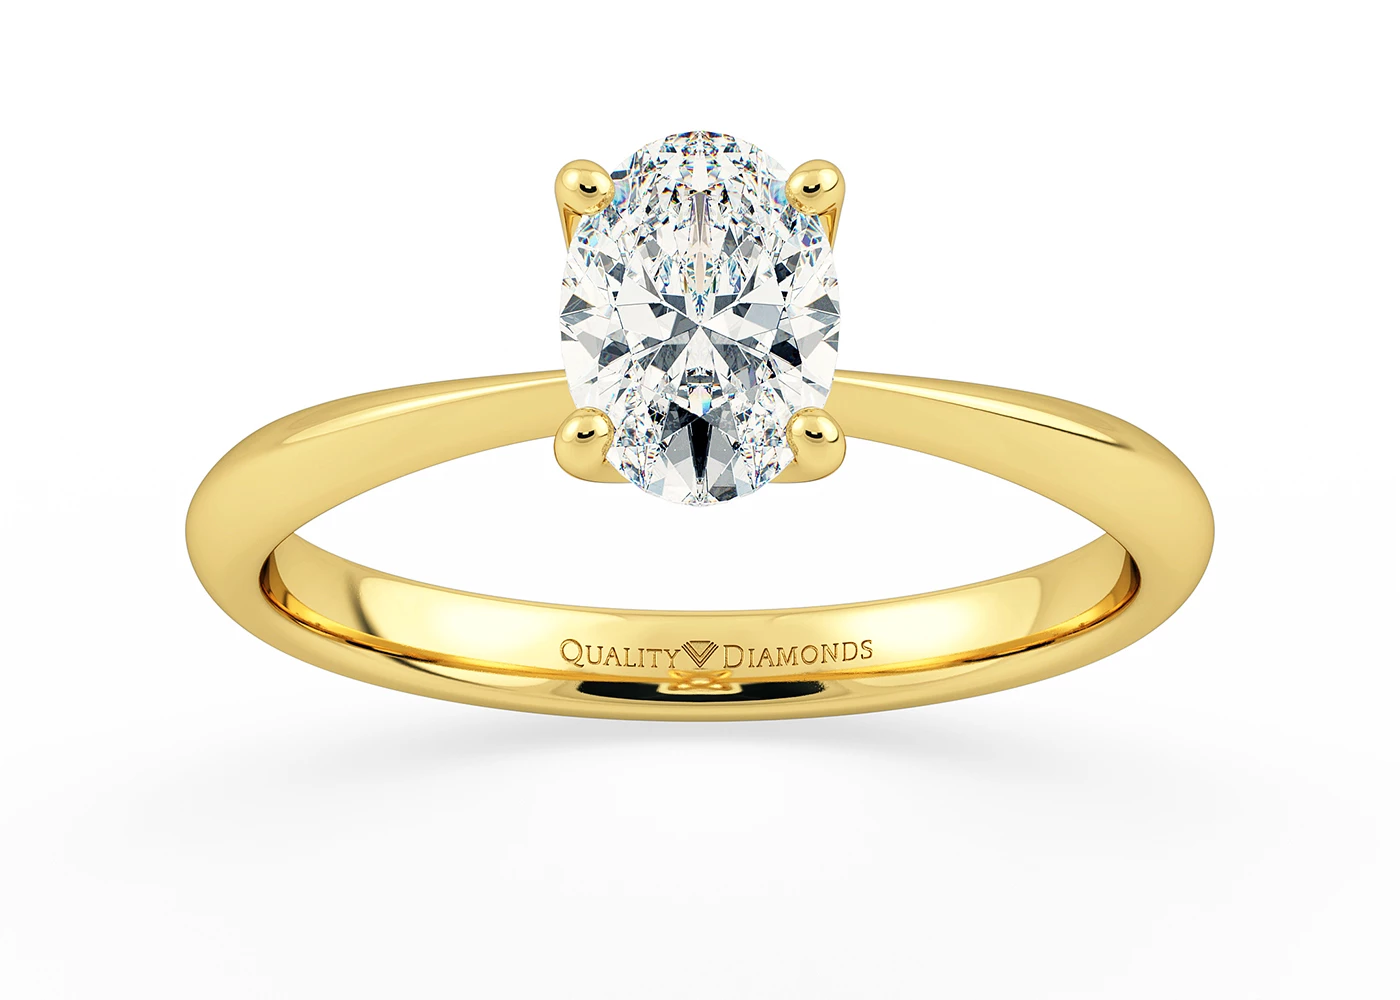 Half Carat Oval Solitaire Diamond Engagement Ring in 18K Yellow Gold